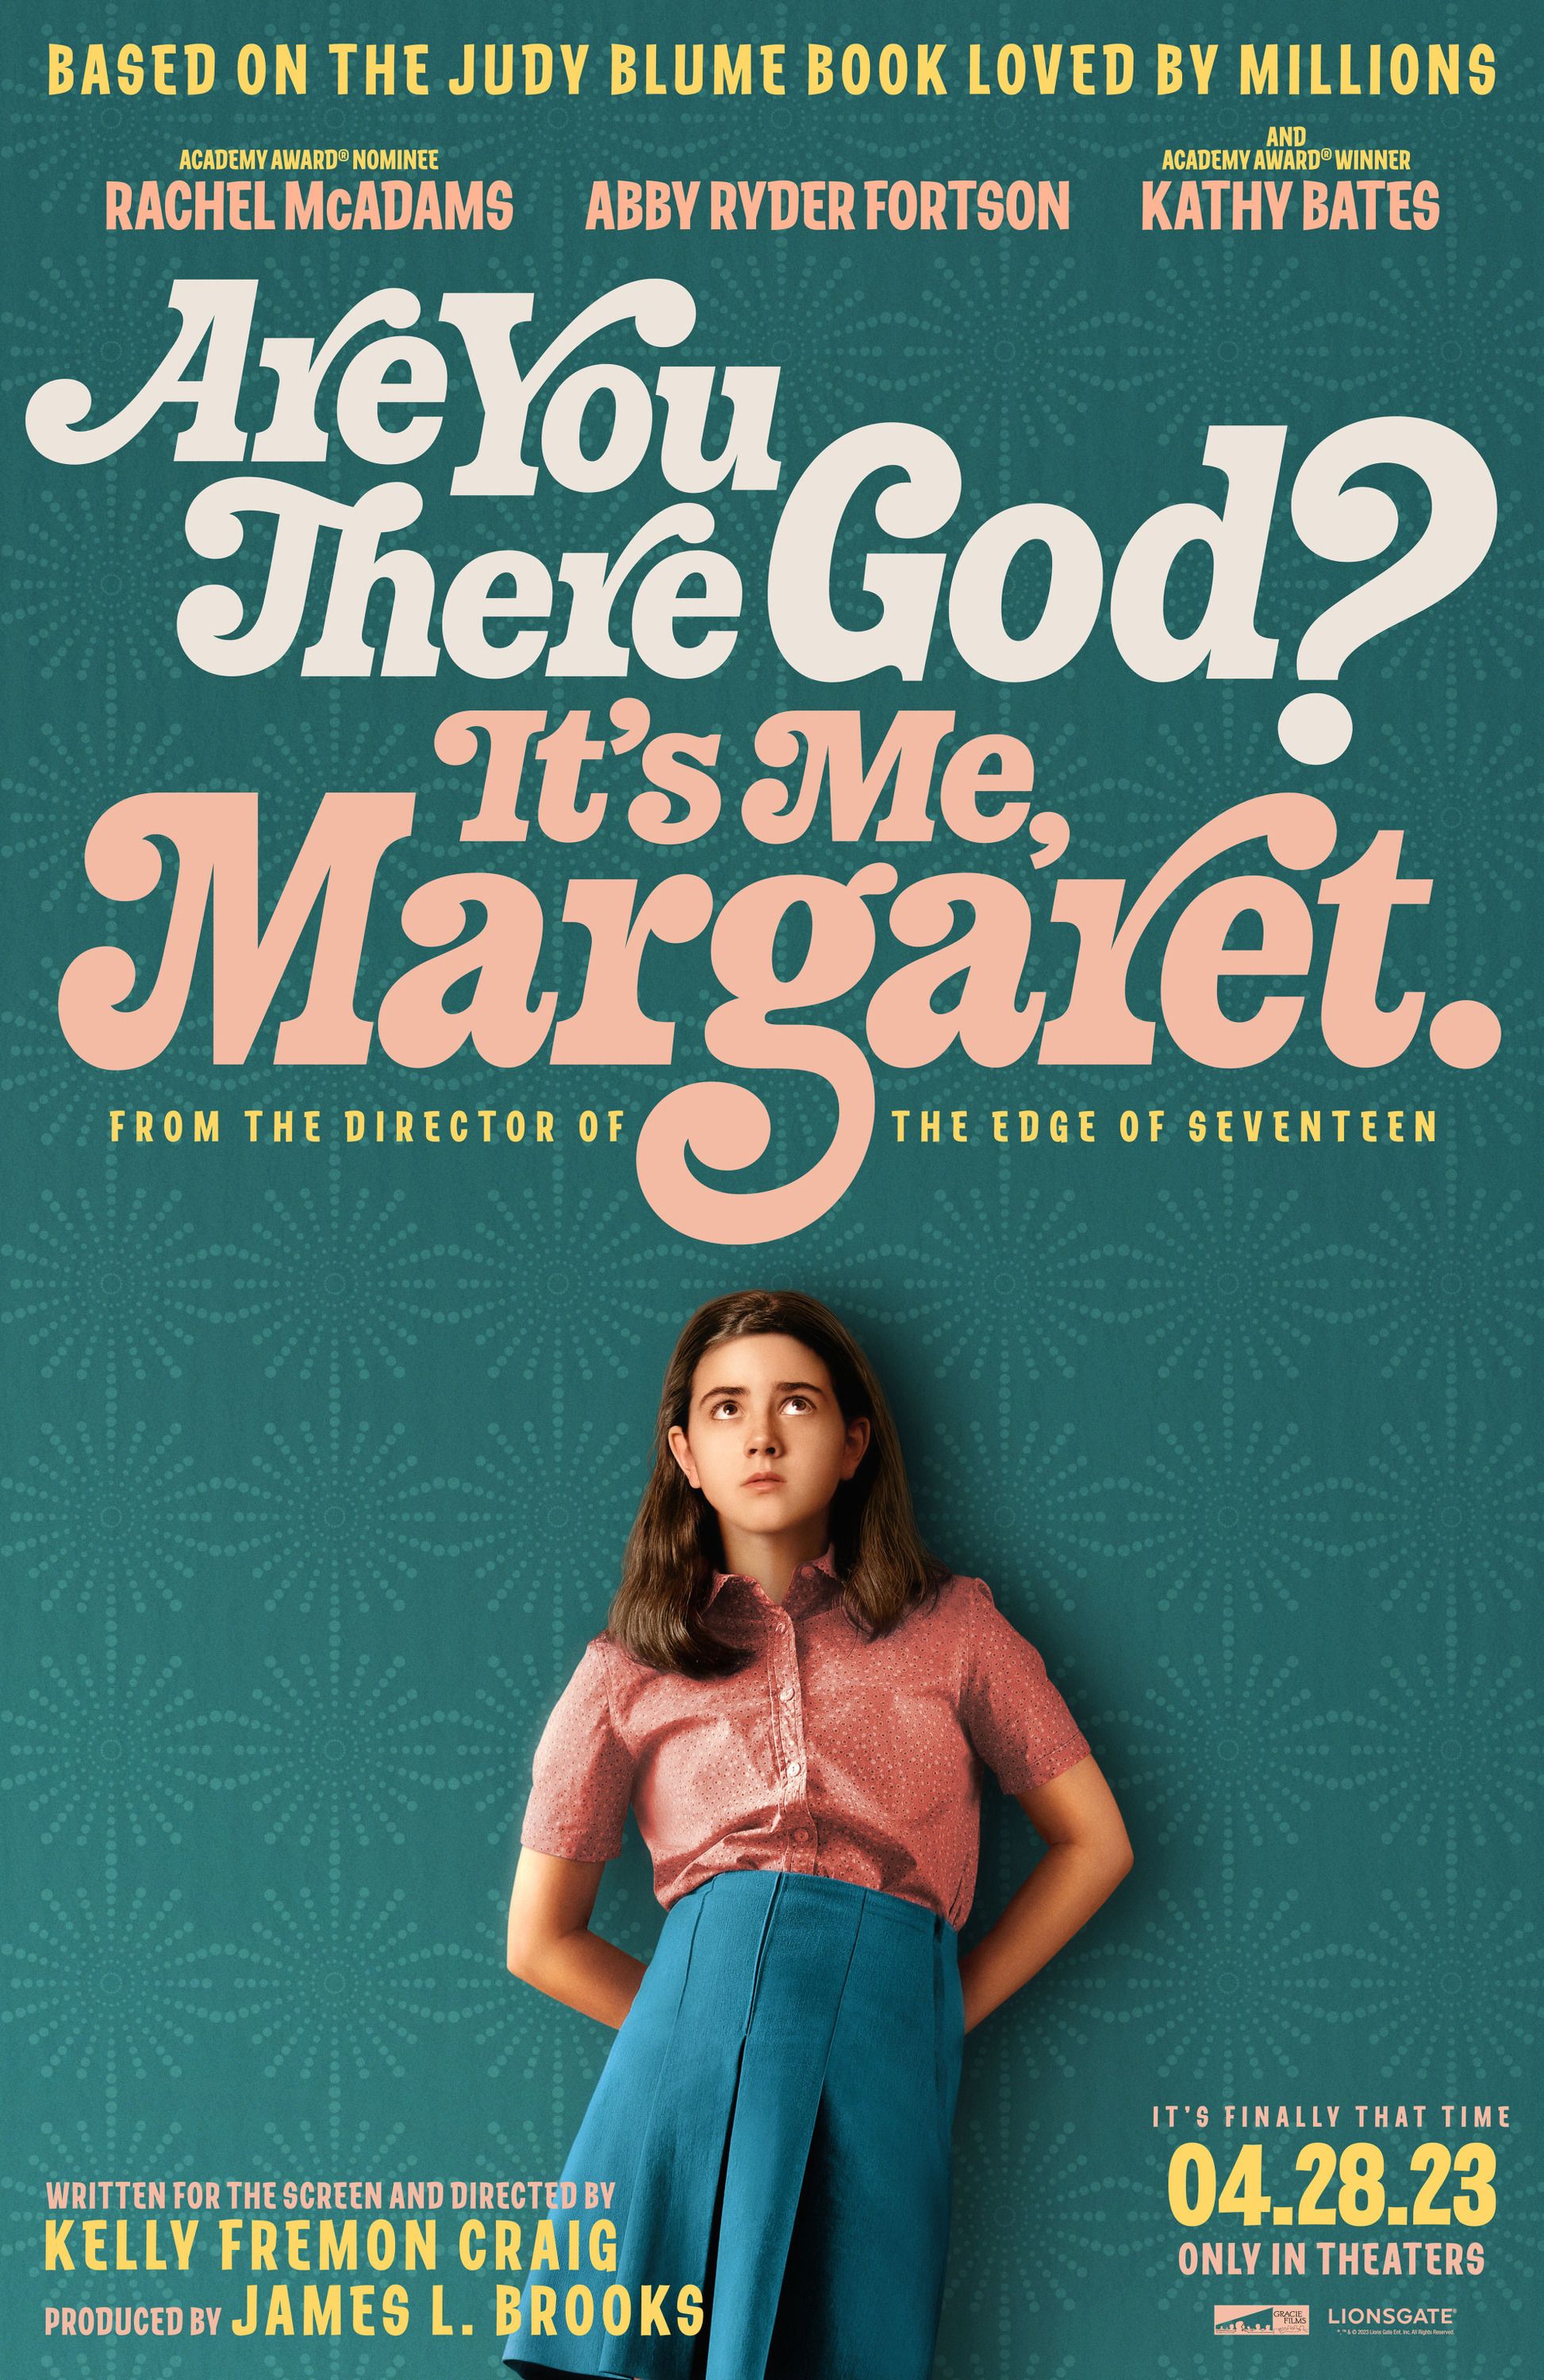 The movie poster for Are You There God? It’s Me, Margaret